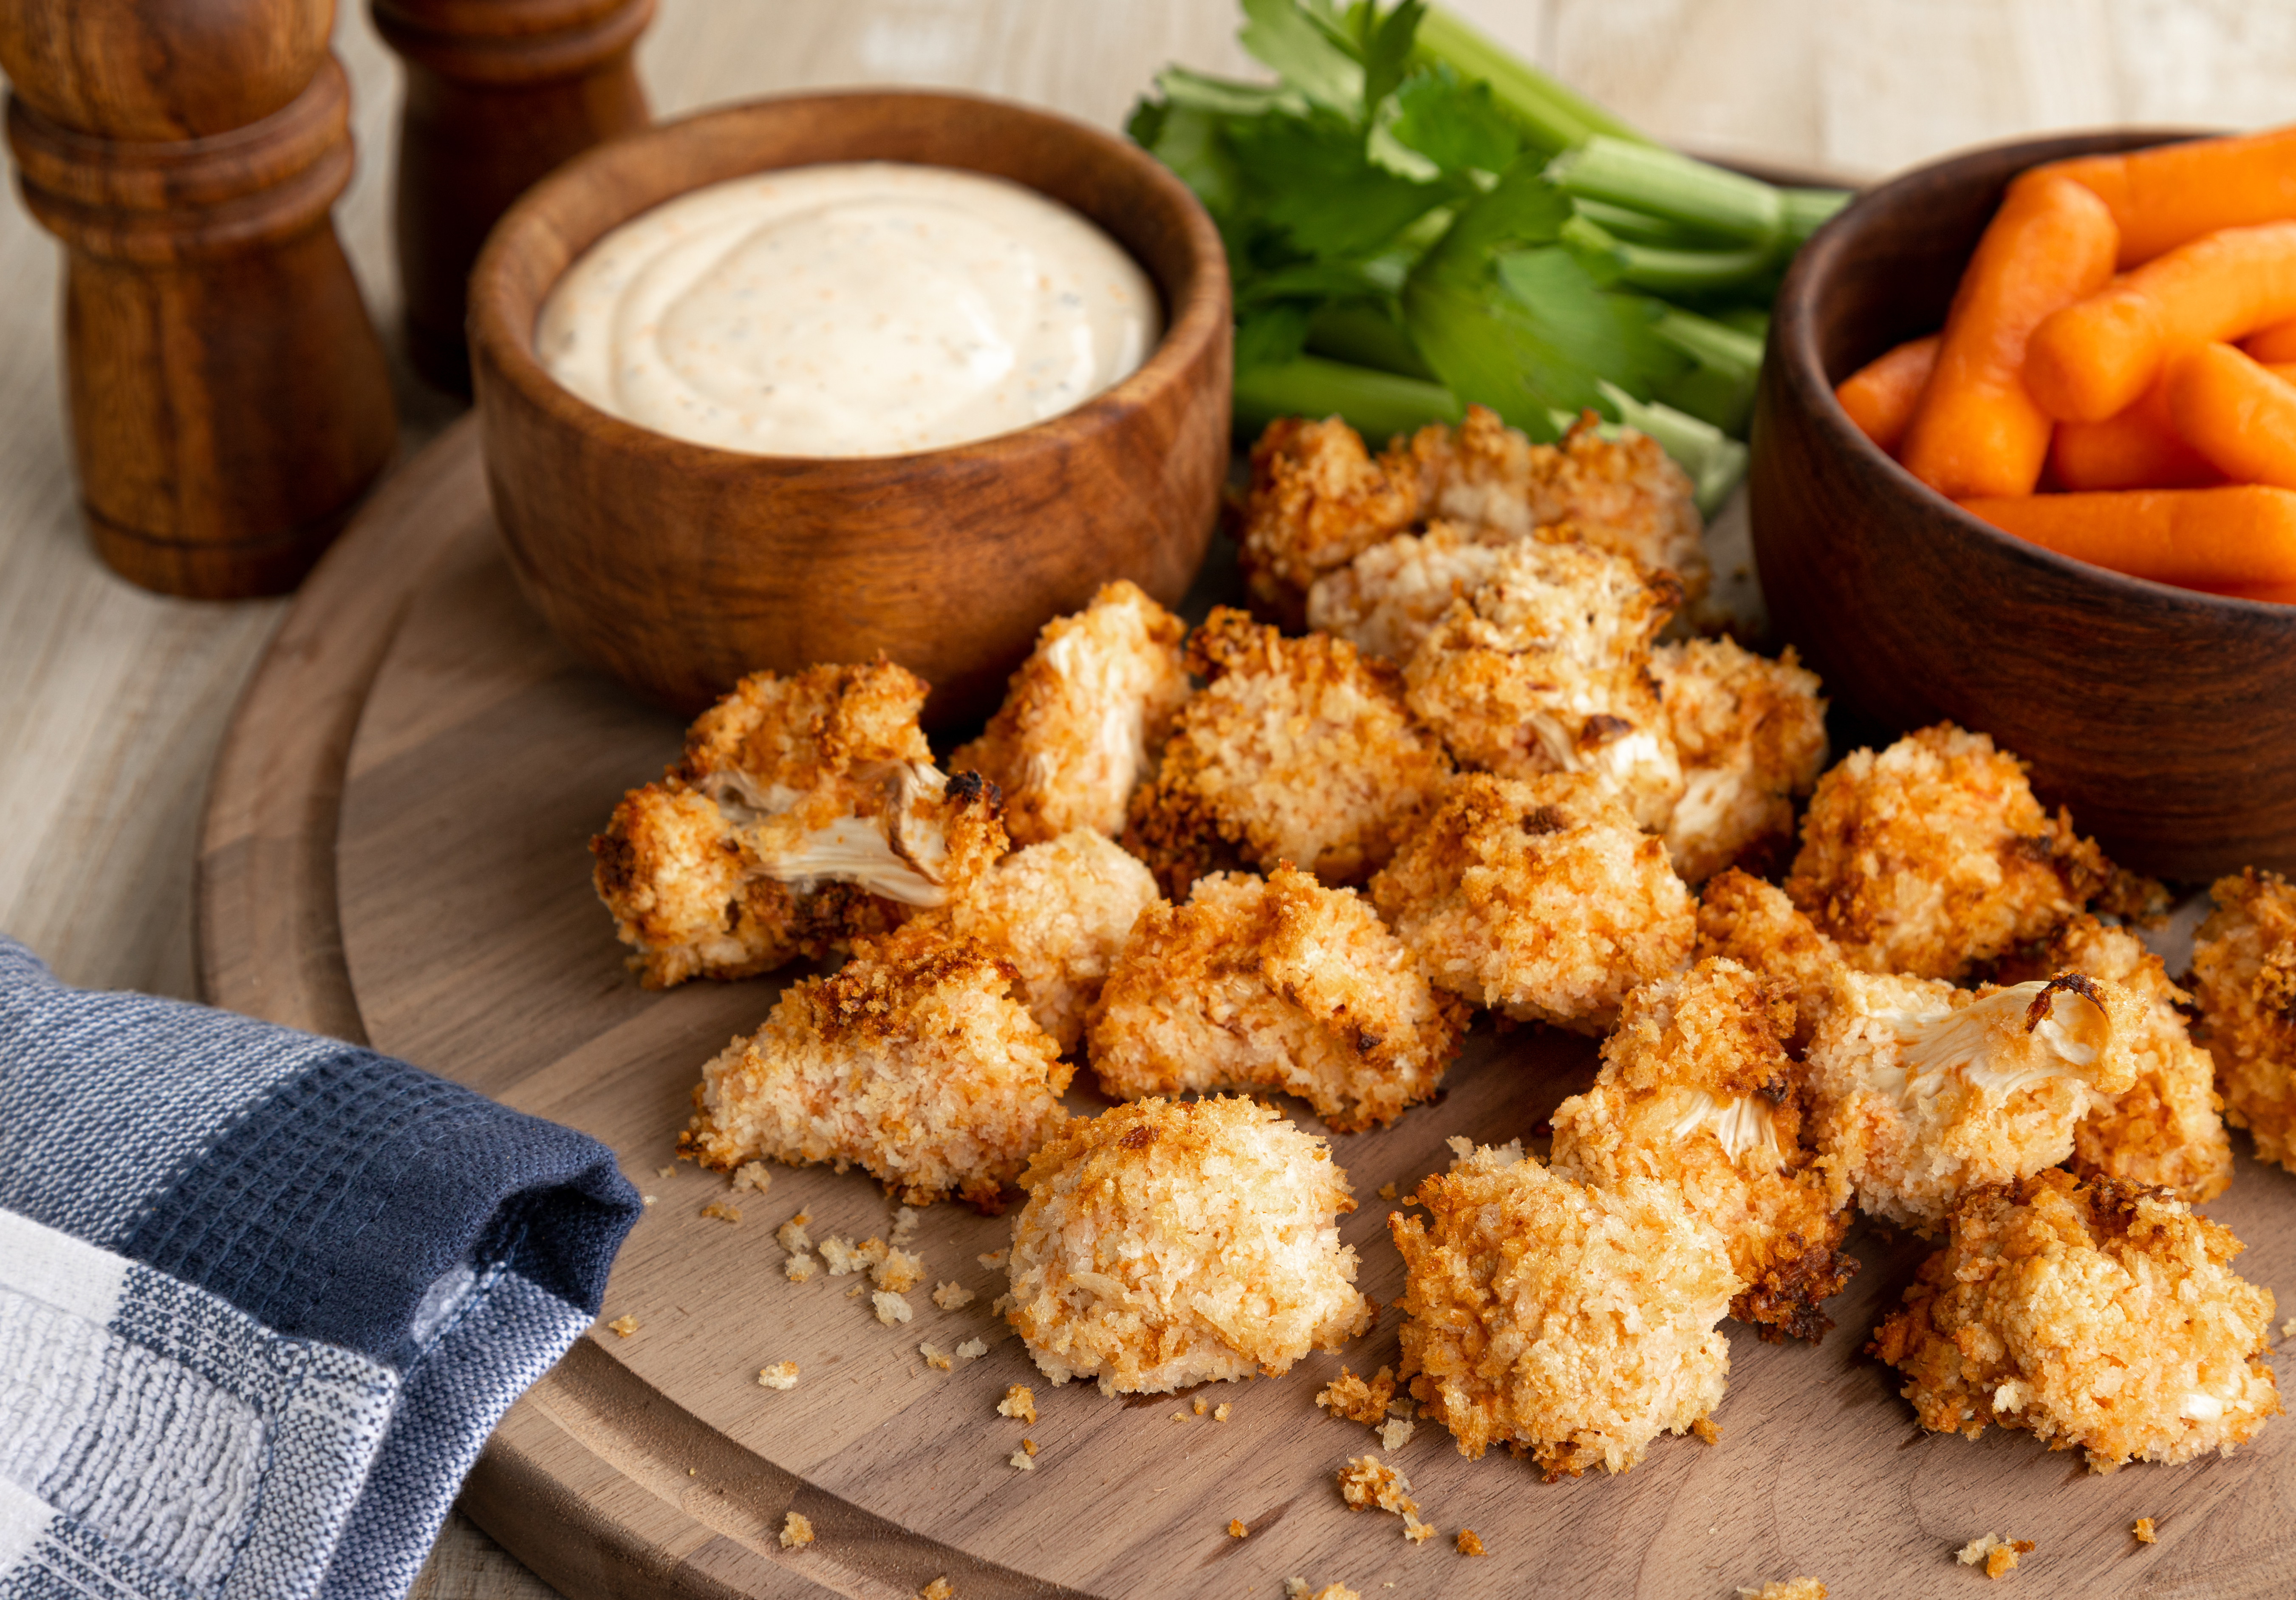 Crispy air fried cauliflower florets are a popular dish made possible with air fry mode.